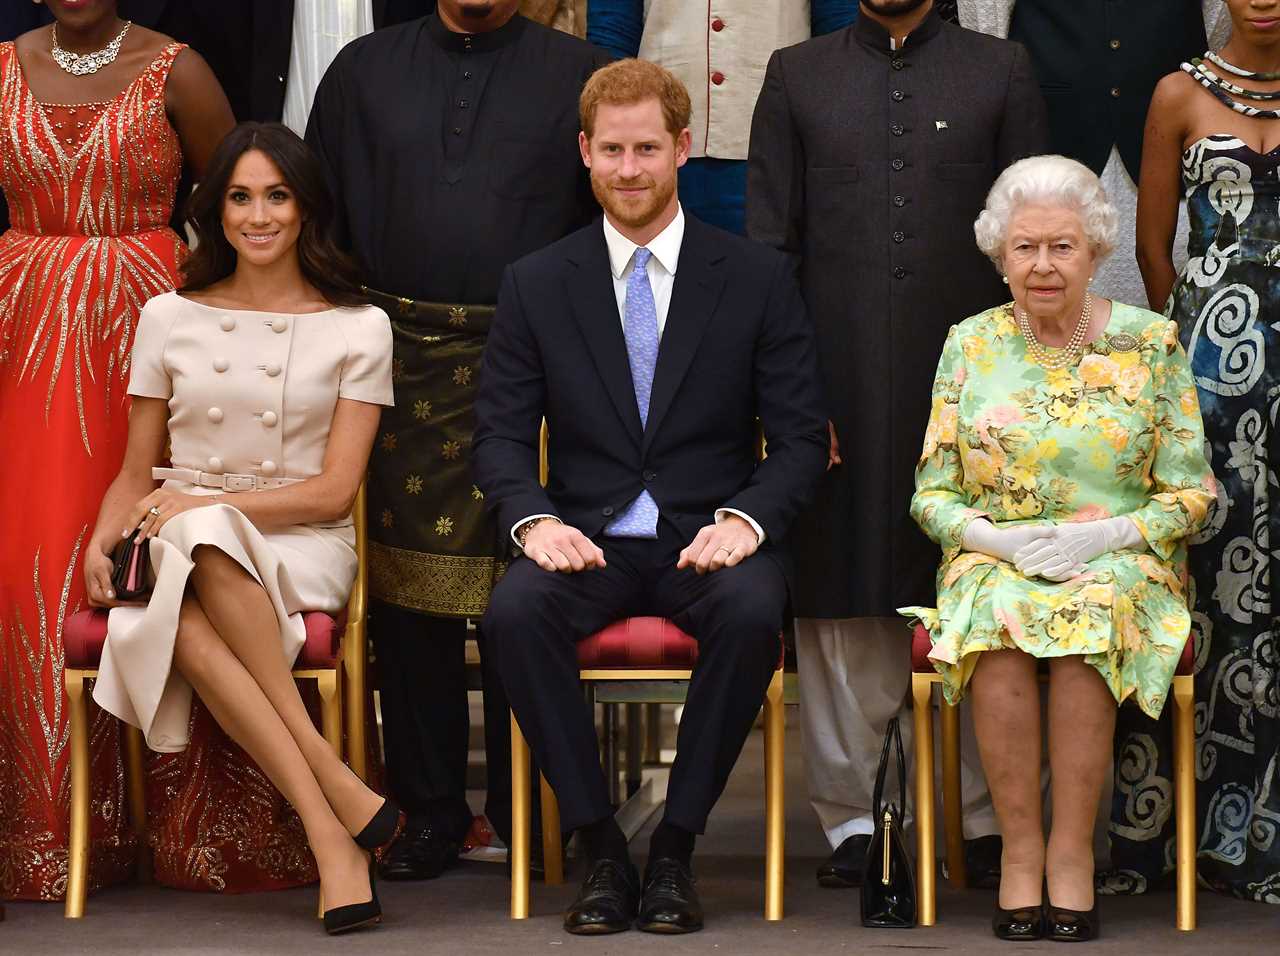 ‘Hurt and exhausted’ Queen’s heartbreaking reaction to Prince Harry and Meghan Markle’s Megxit is revealed by friend